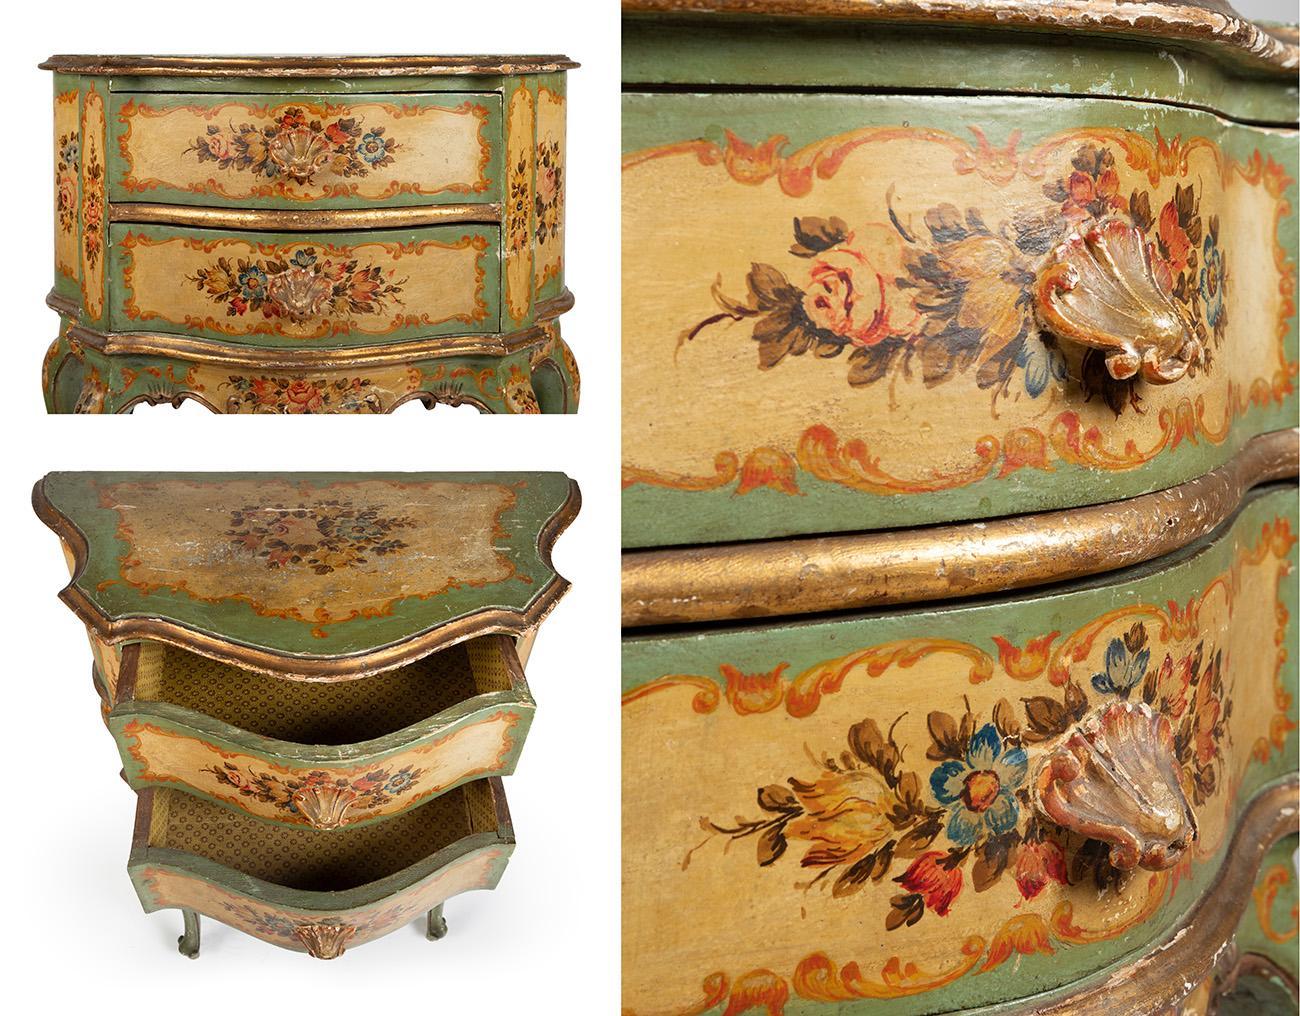 French Intricate and Beautiful Antique Hand-Painted Small Commode in Rococo Manner